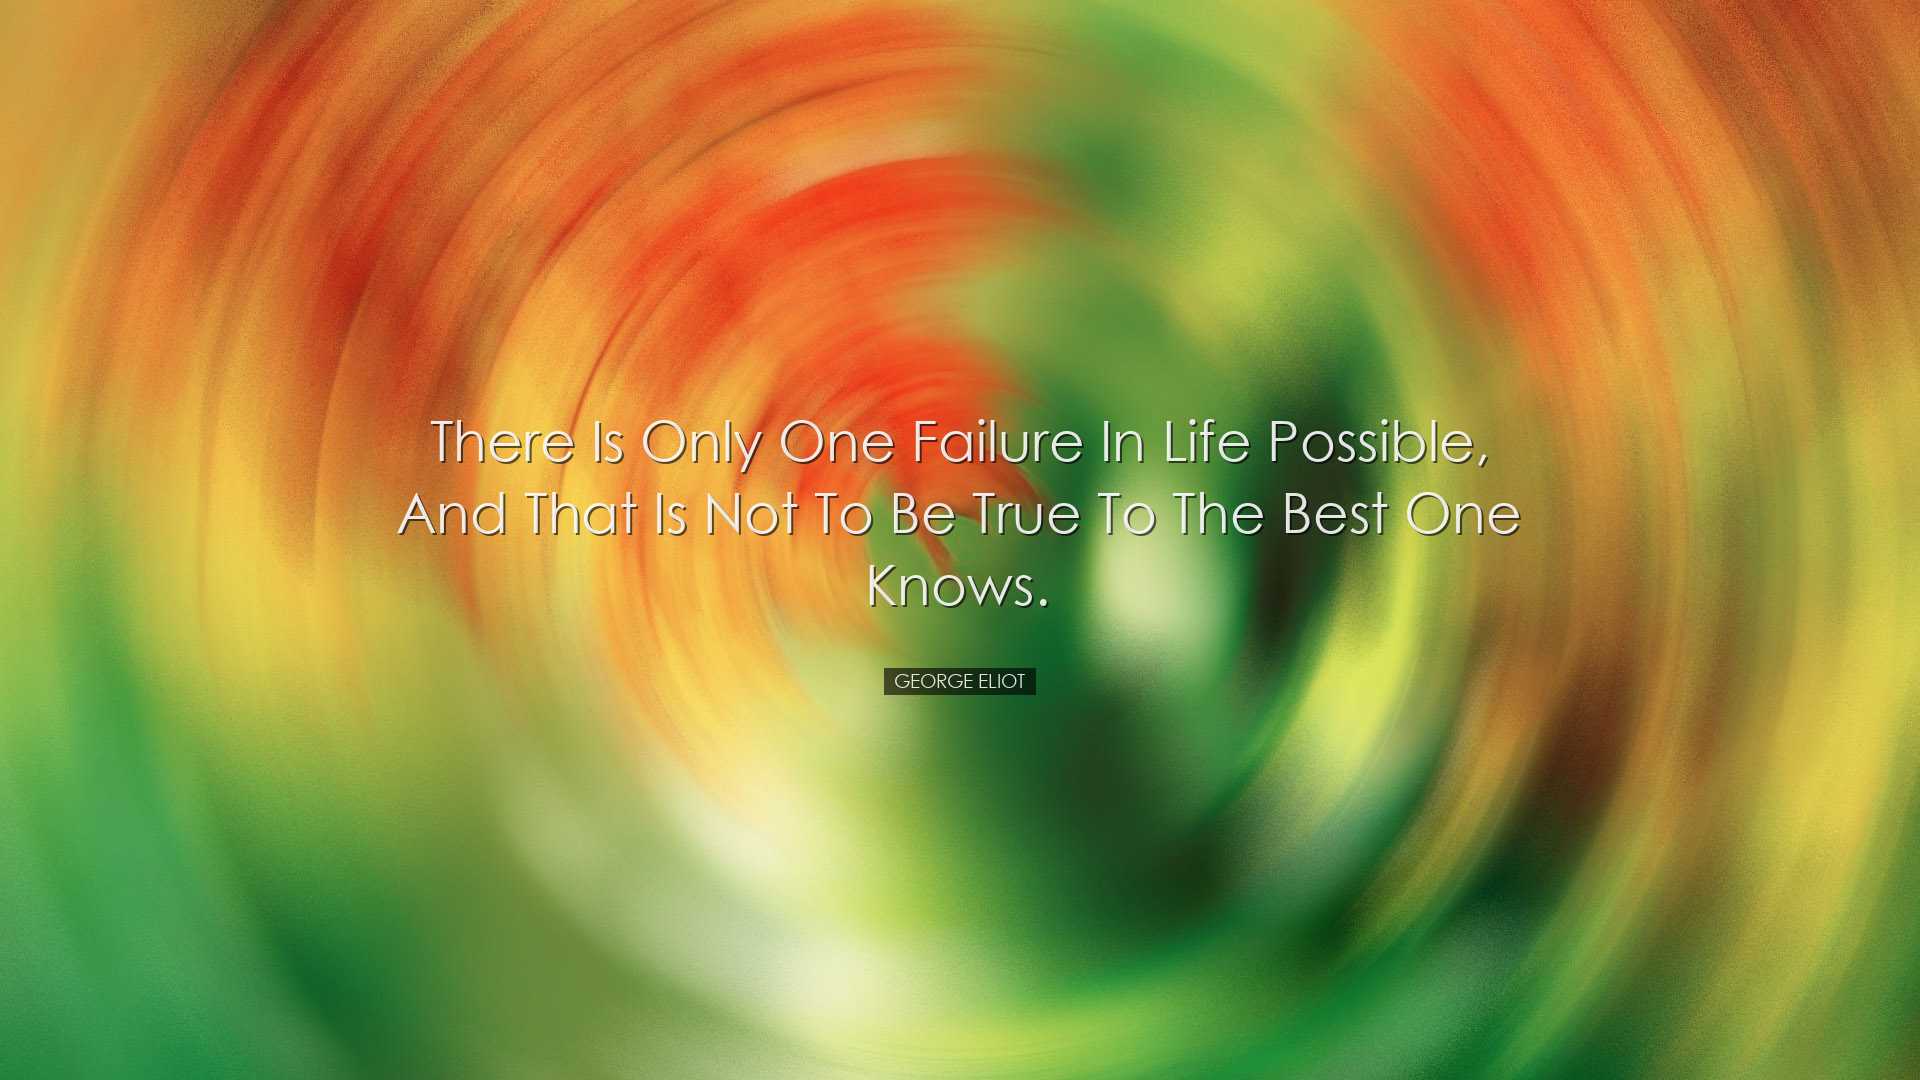 There is only one failure in life possible, and that is not to be